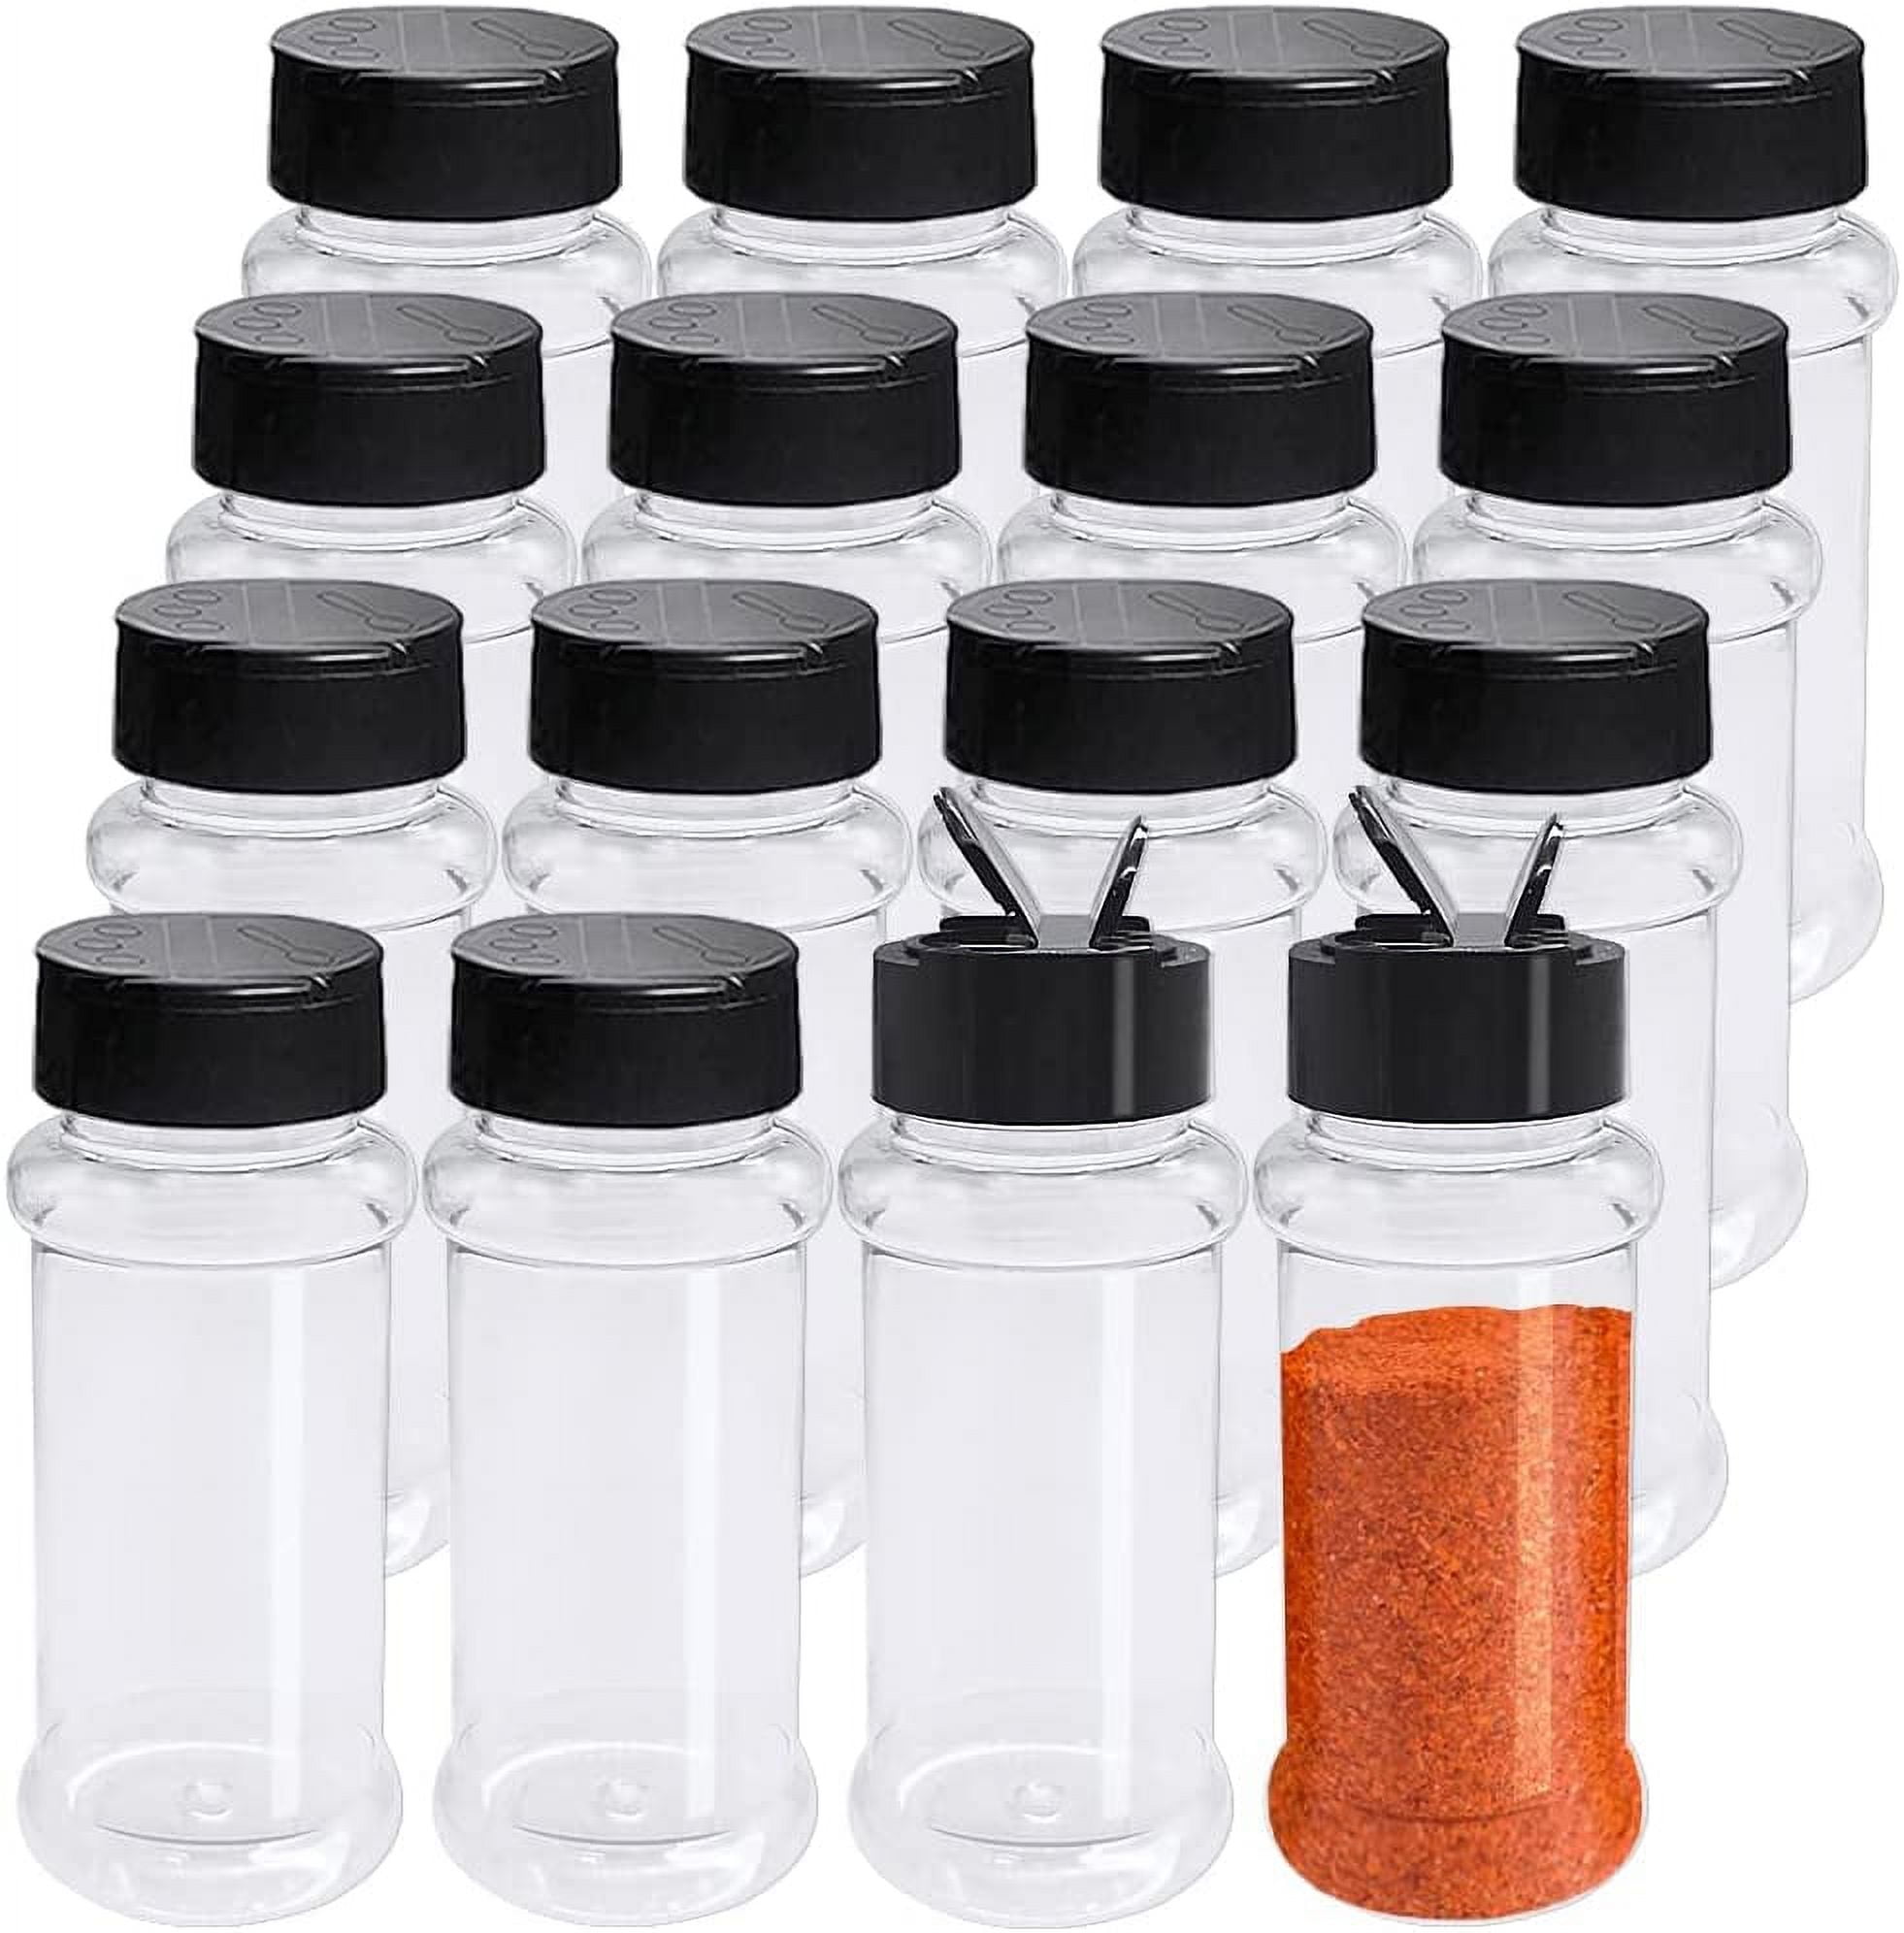 2021 Newest Pet Empty Glass Seasoning Bottles Spice Shaker Powder Containers  Pepper Salt Jar with Flapper Cap - China Seasoning Storage Bottles and Spice  Jar price